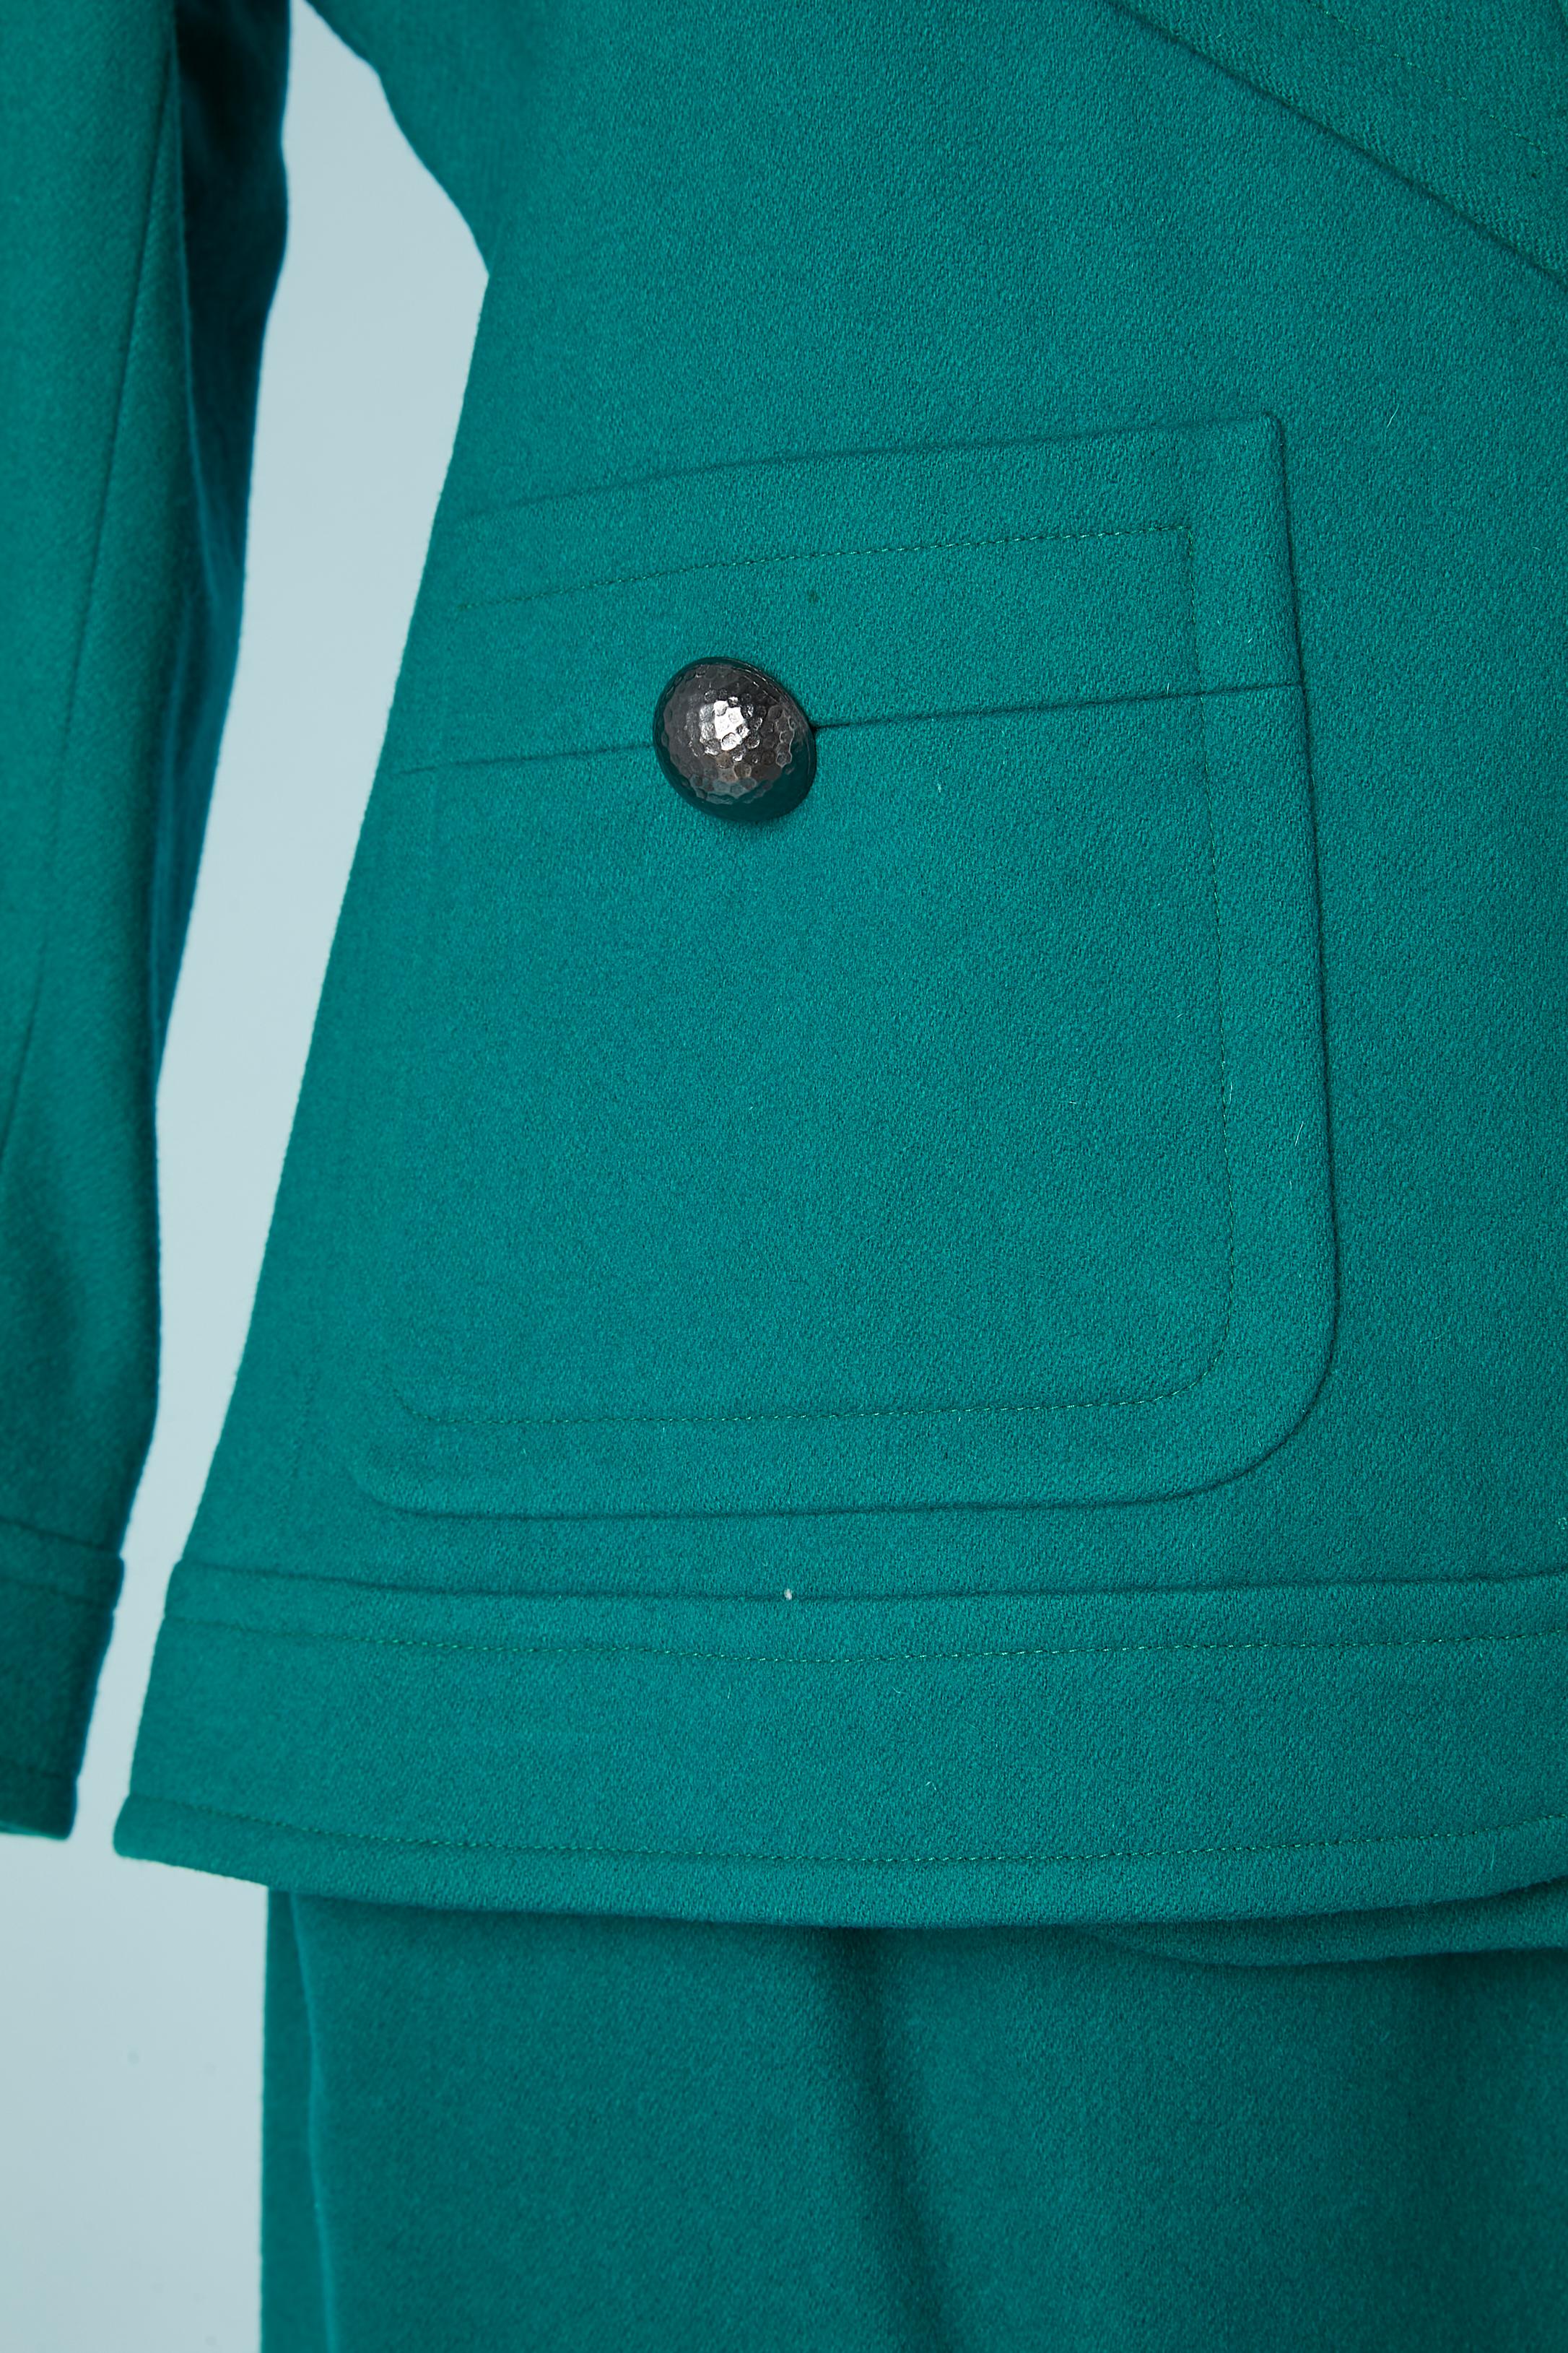 Green wool skirt-suit with graphic collar Saint Laurent Rive Gauche Circa 1980's For Sale 1